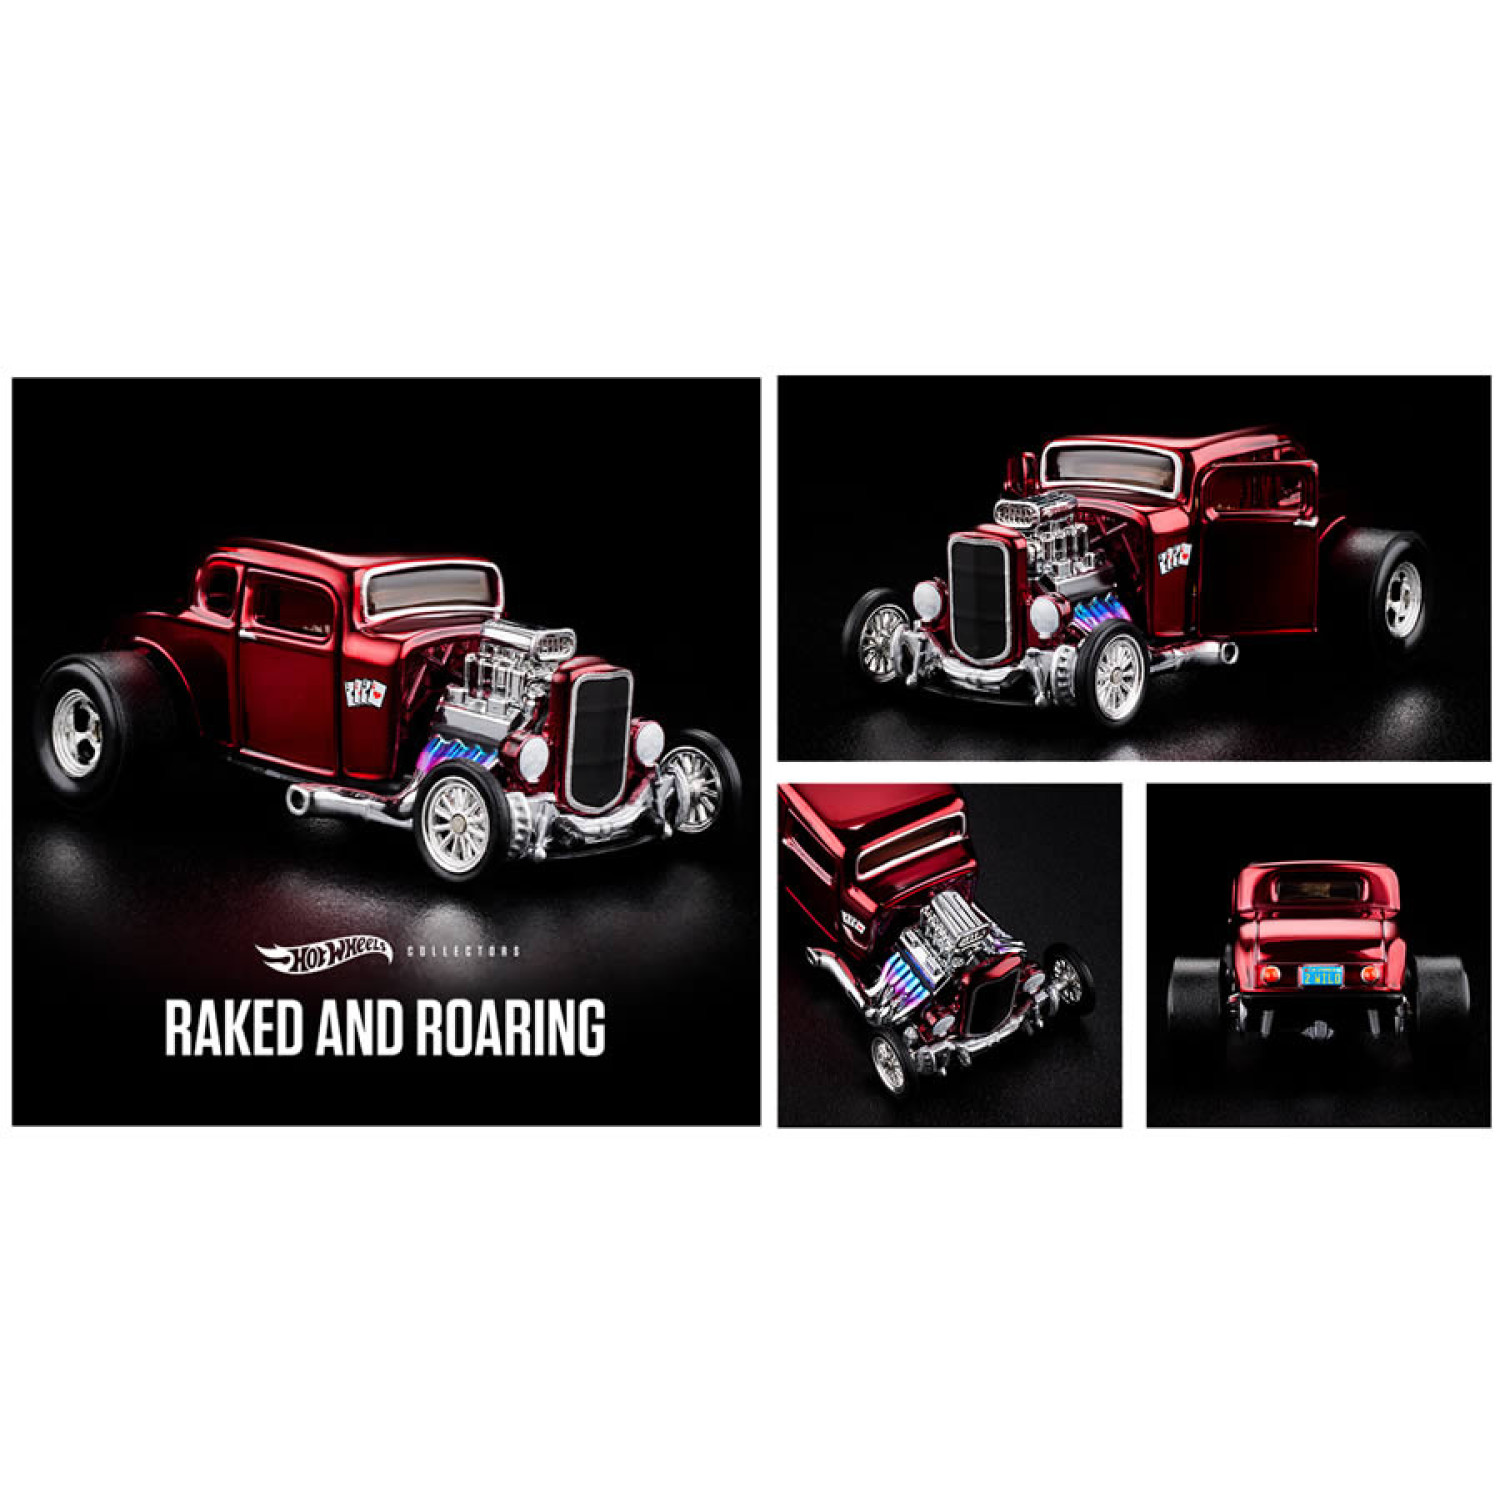 RLC Exclusive '32 Ford